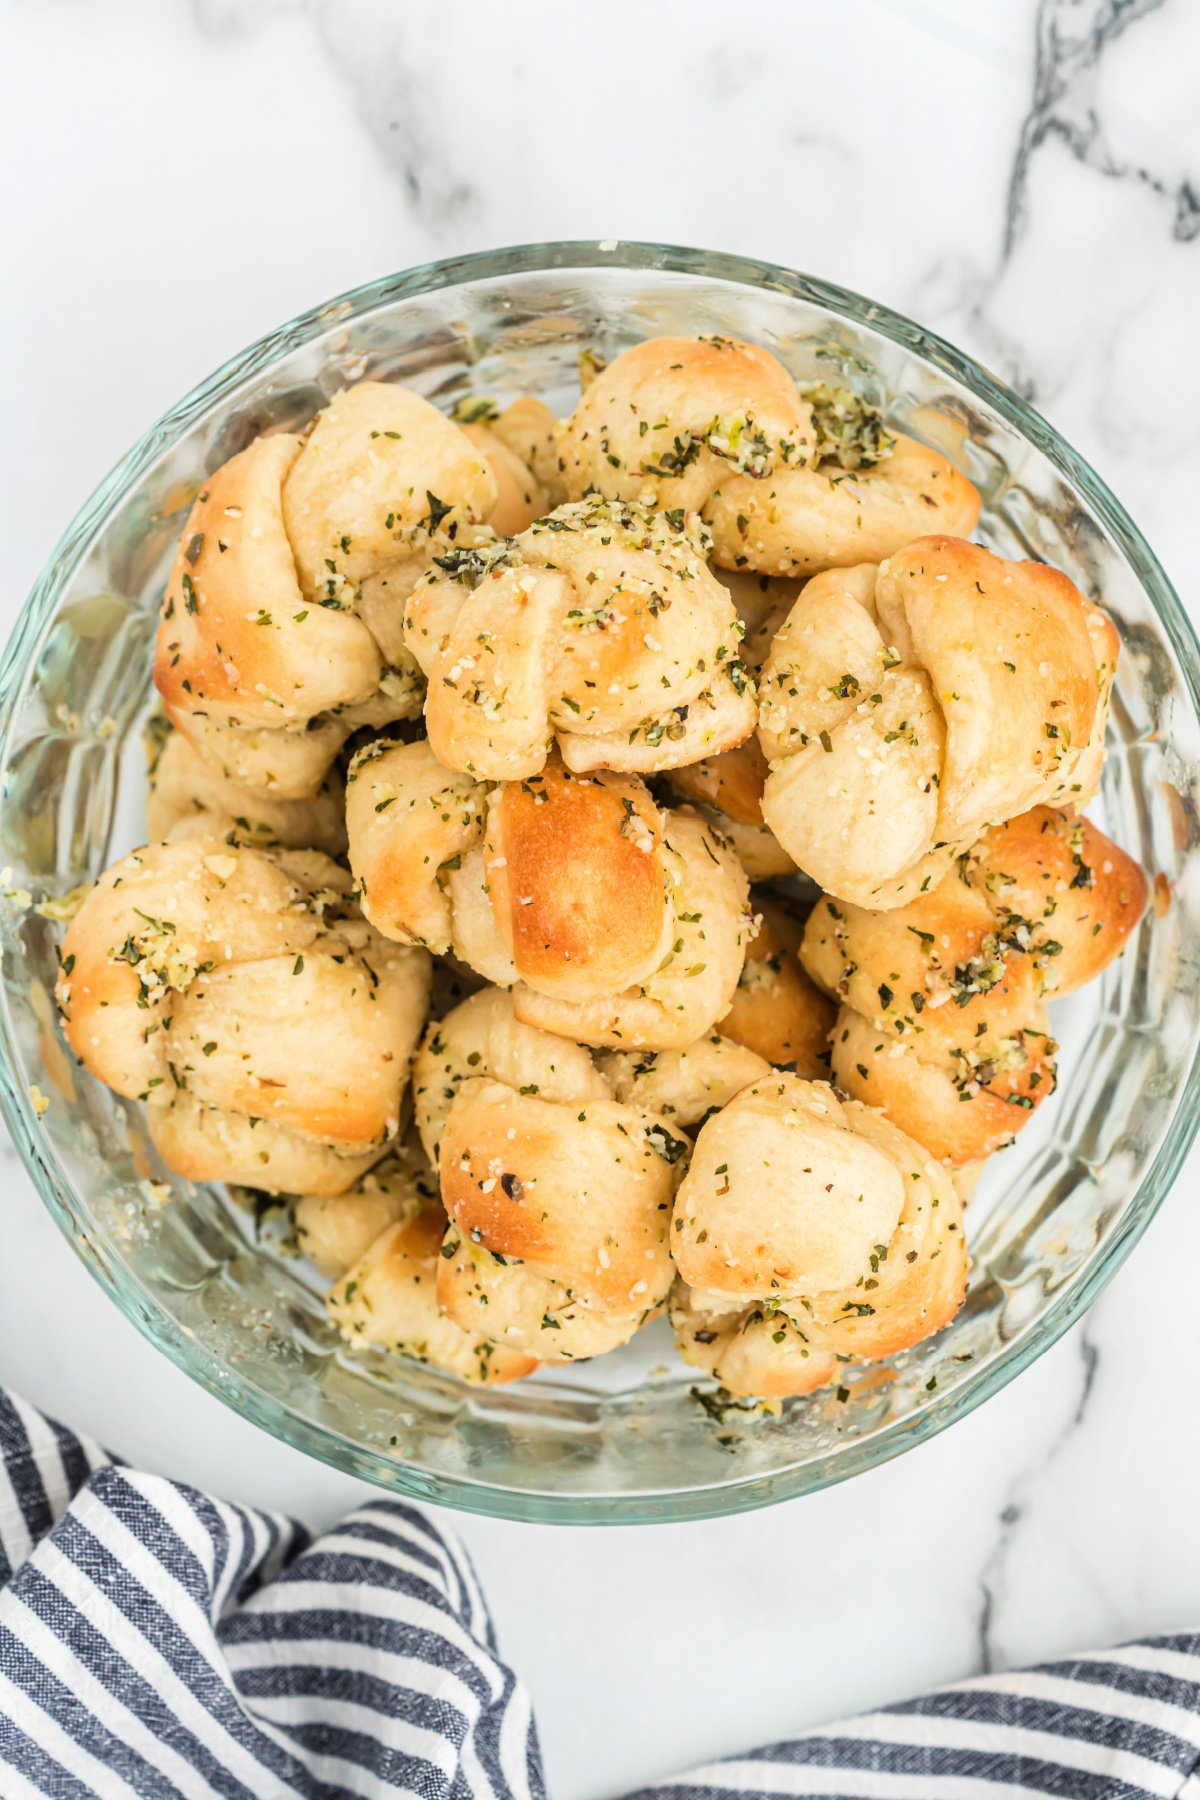 New York style garlic knots are made with real minced garlic